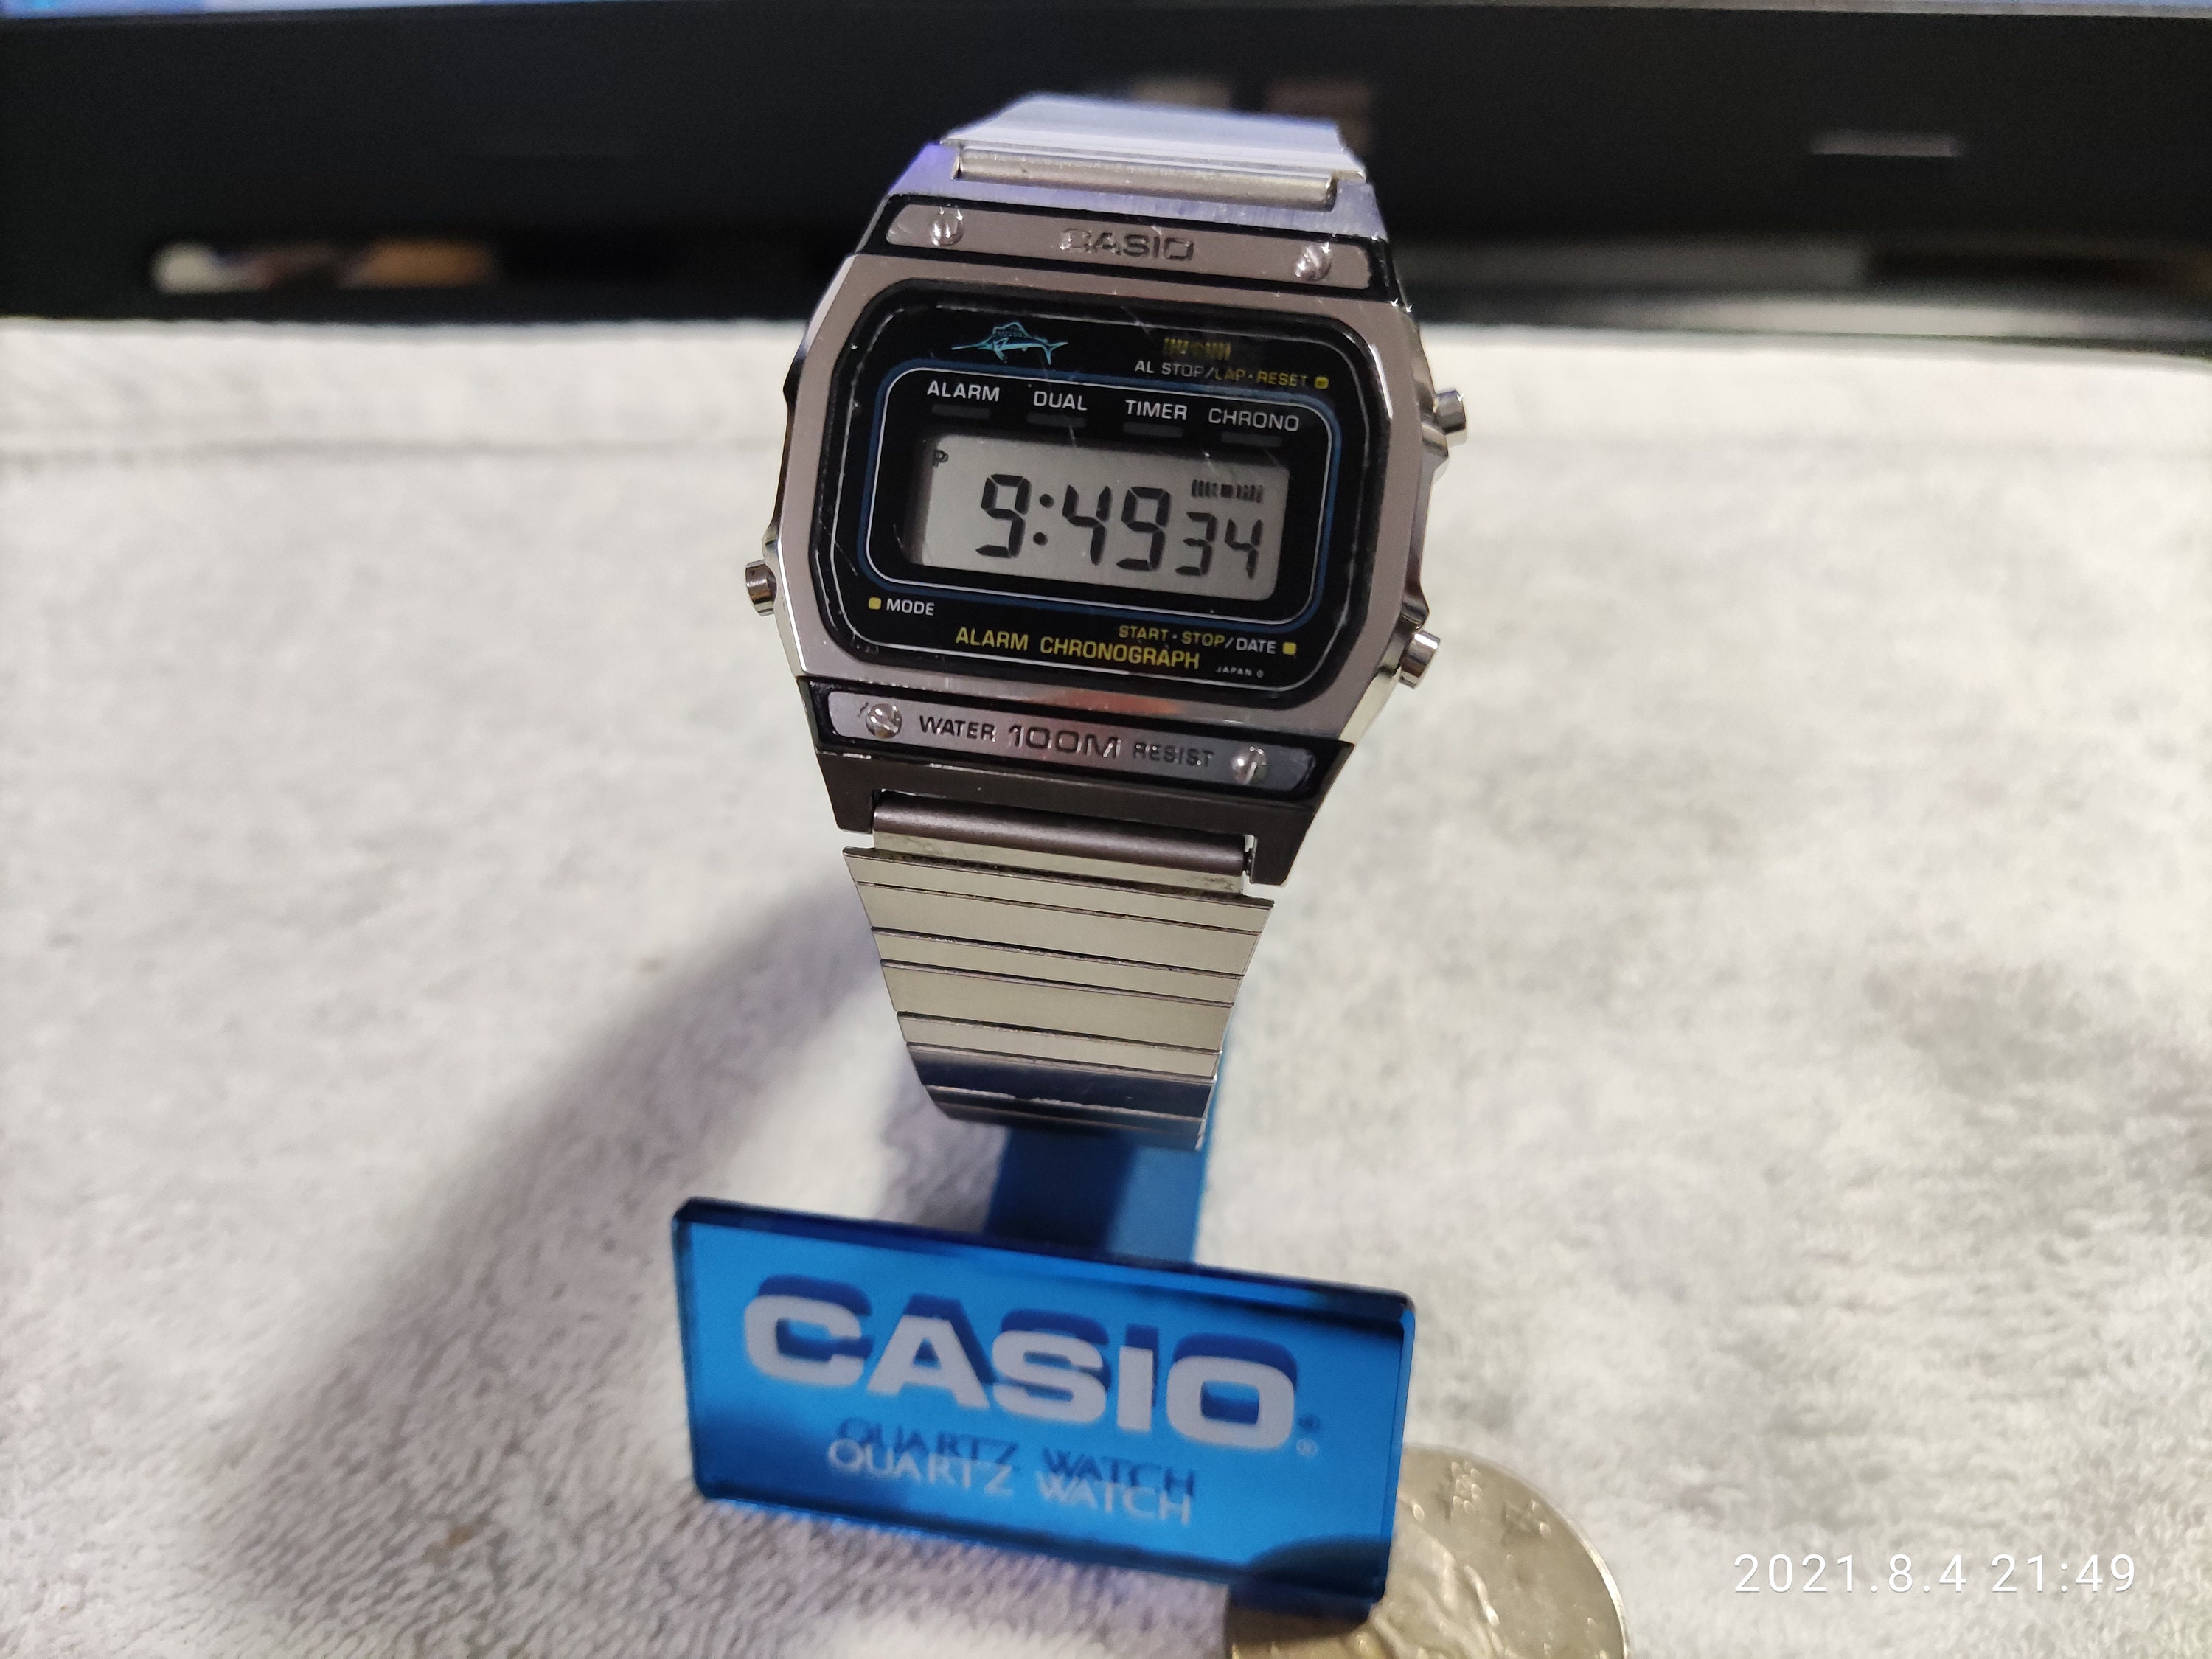 ADD This To Your Collection! Vintage 1980 CASIO Marlin 